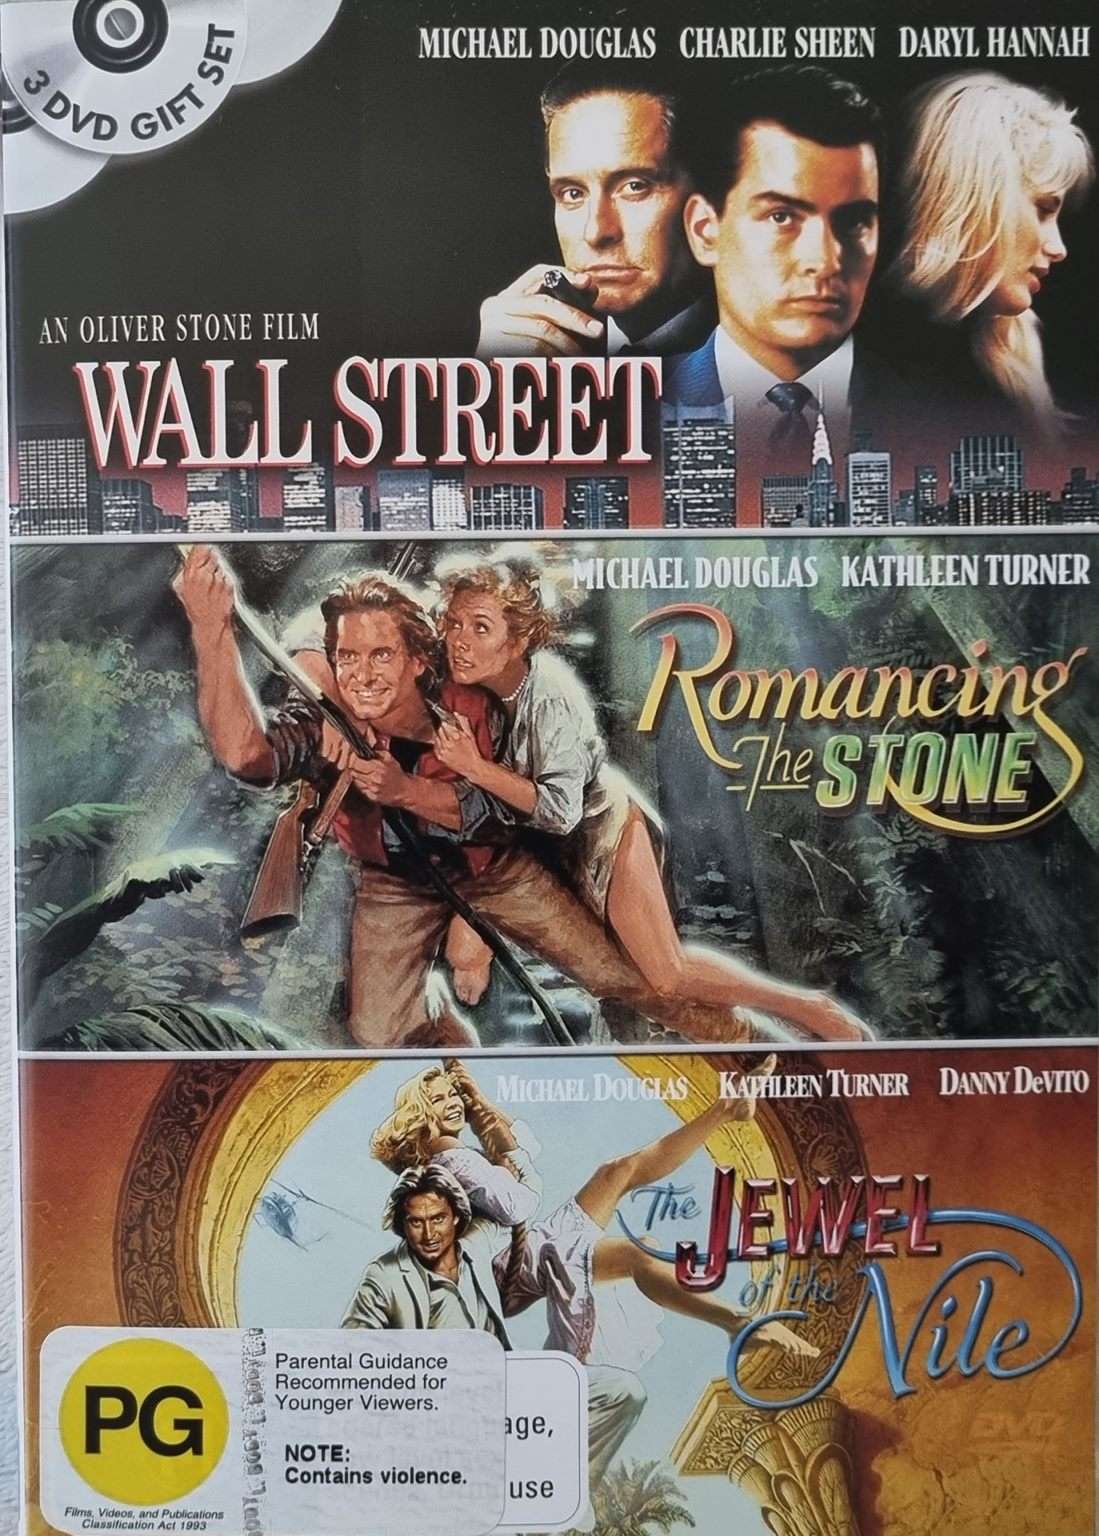 Wall Street / Romancing the Stone / The Jewel of the Nile